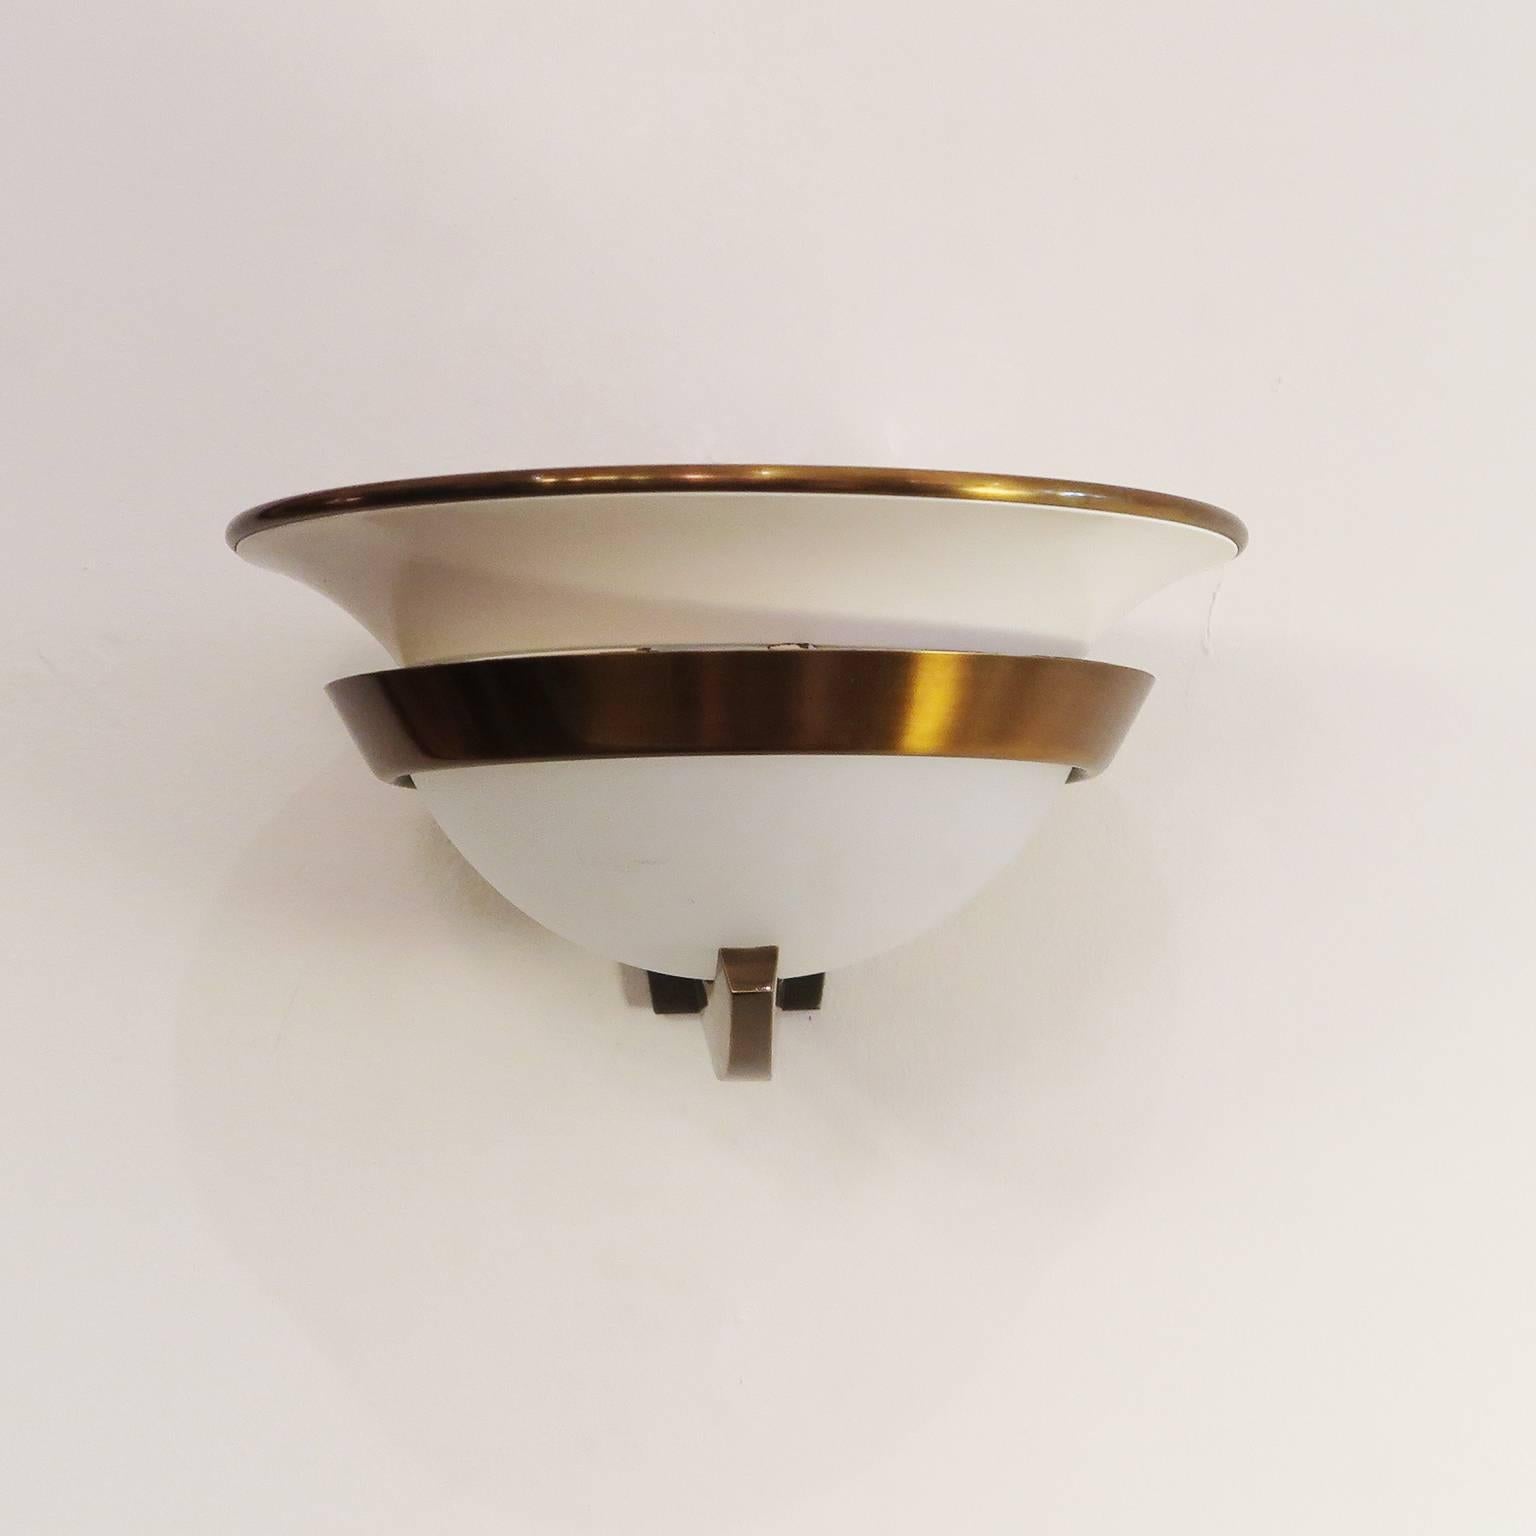 Pair of Art Deco sconces by Genet et Michon. Frosted glass bowl with ivory lacquer metal and brass details.